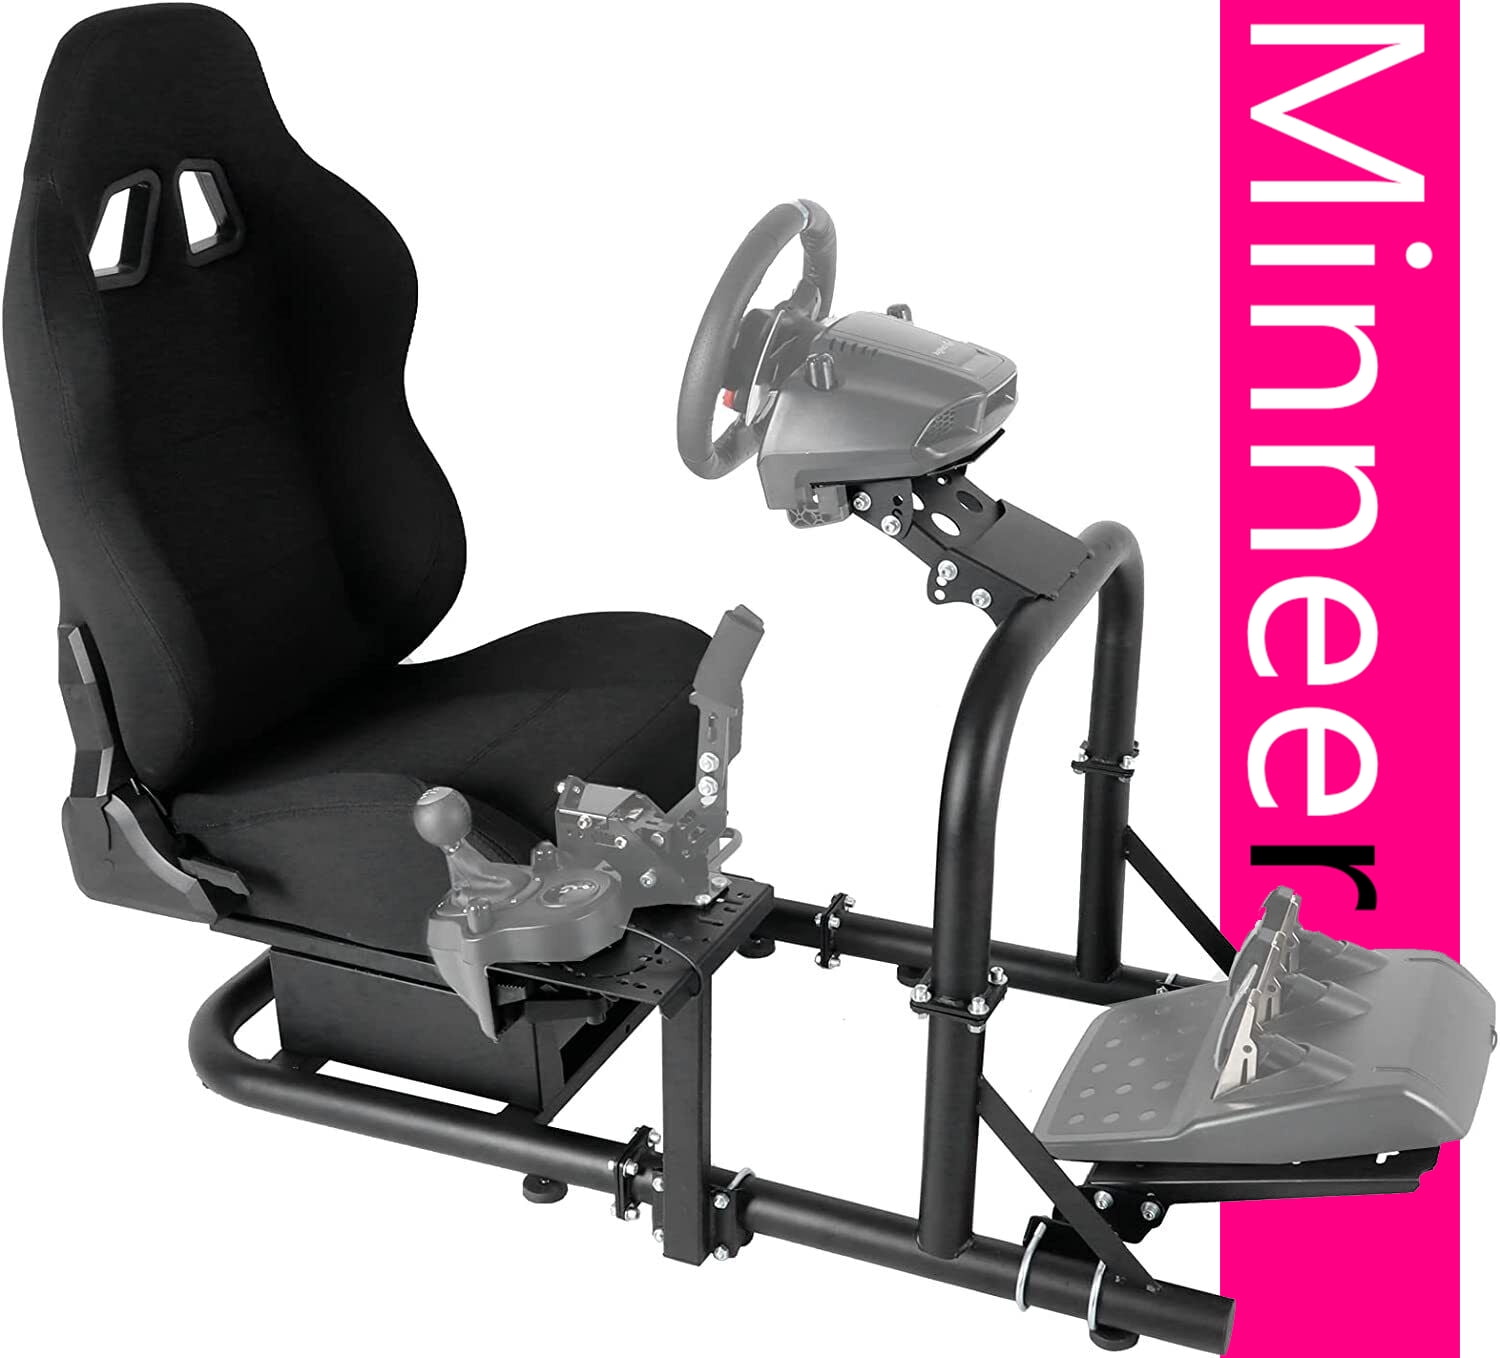 Racing Simulator Game Steering Wheel Stand For Logitech G25 G27 G29 -  Instrument Parts & Accessories - AliExpress